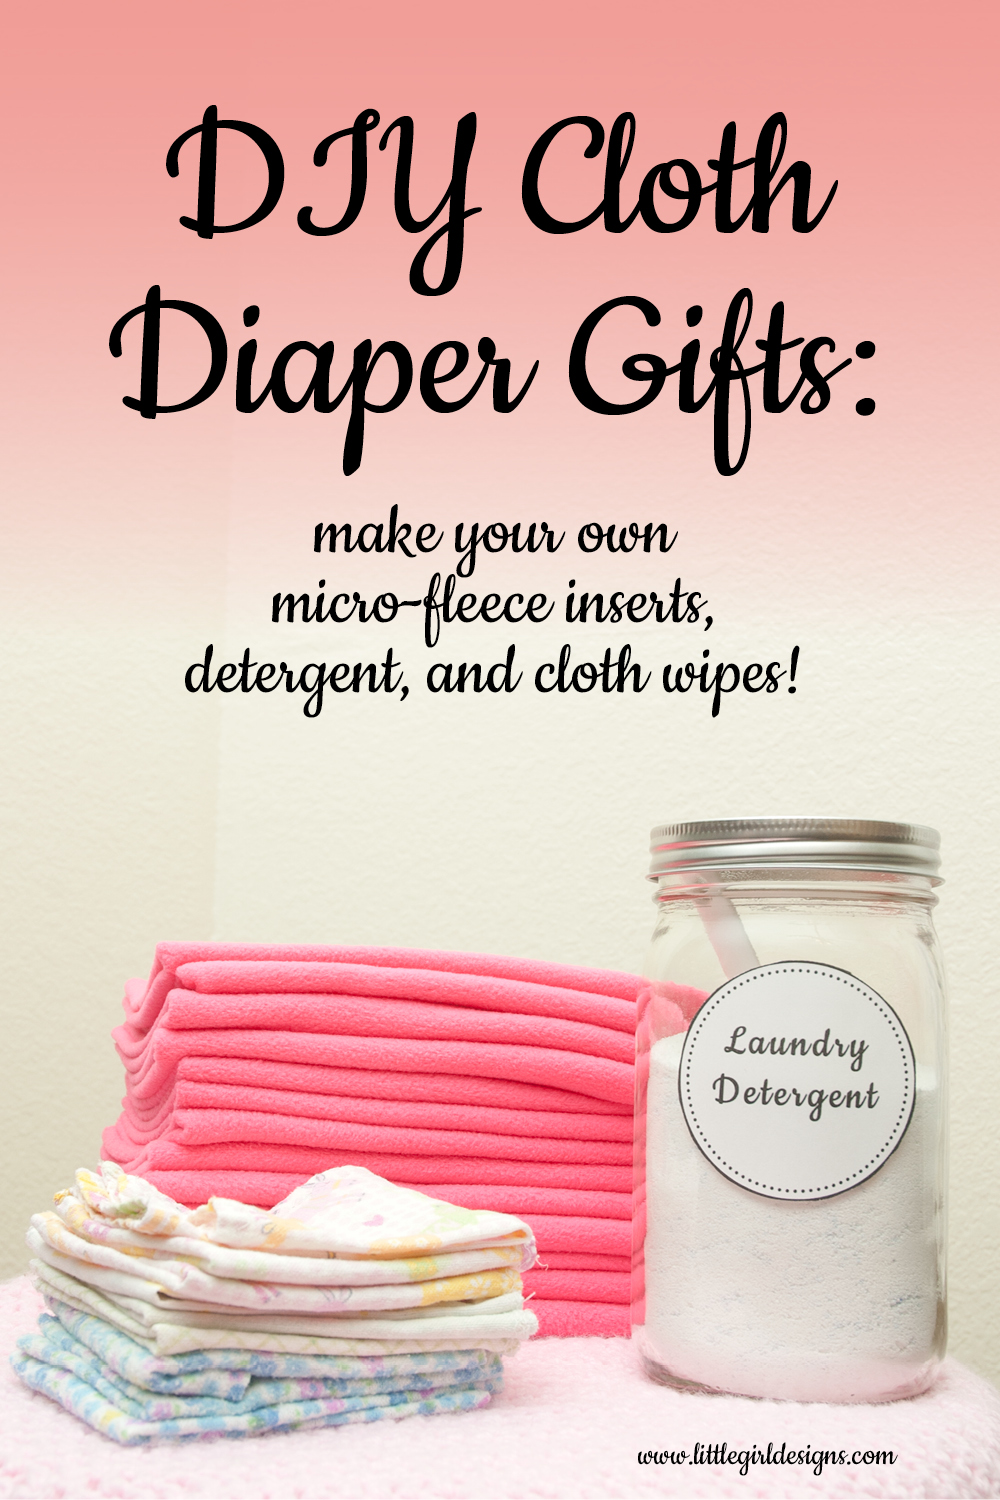 I'll show you how to make your own microfleece inserts, cloth diaper friendly detergent, and cloth wipes. The perfect gift for the new mom who is cloth-diapering! @littlegirldesigns.com